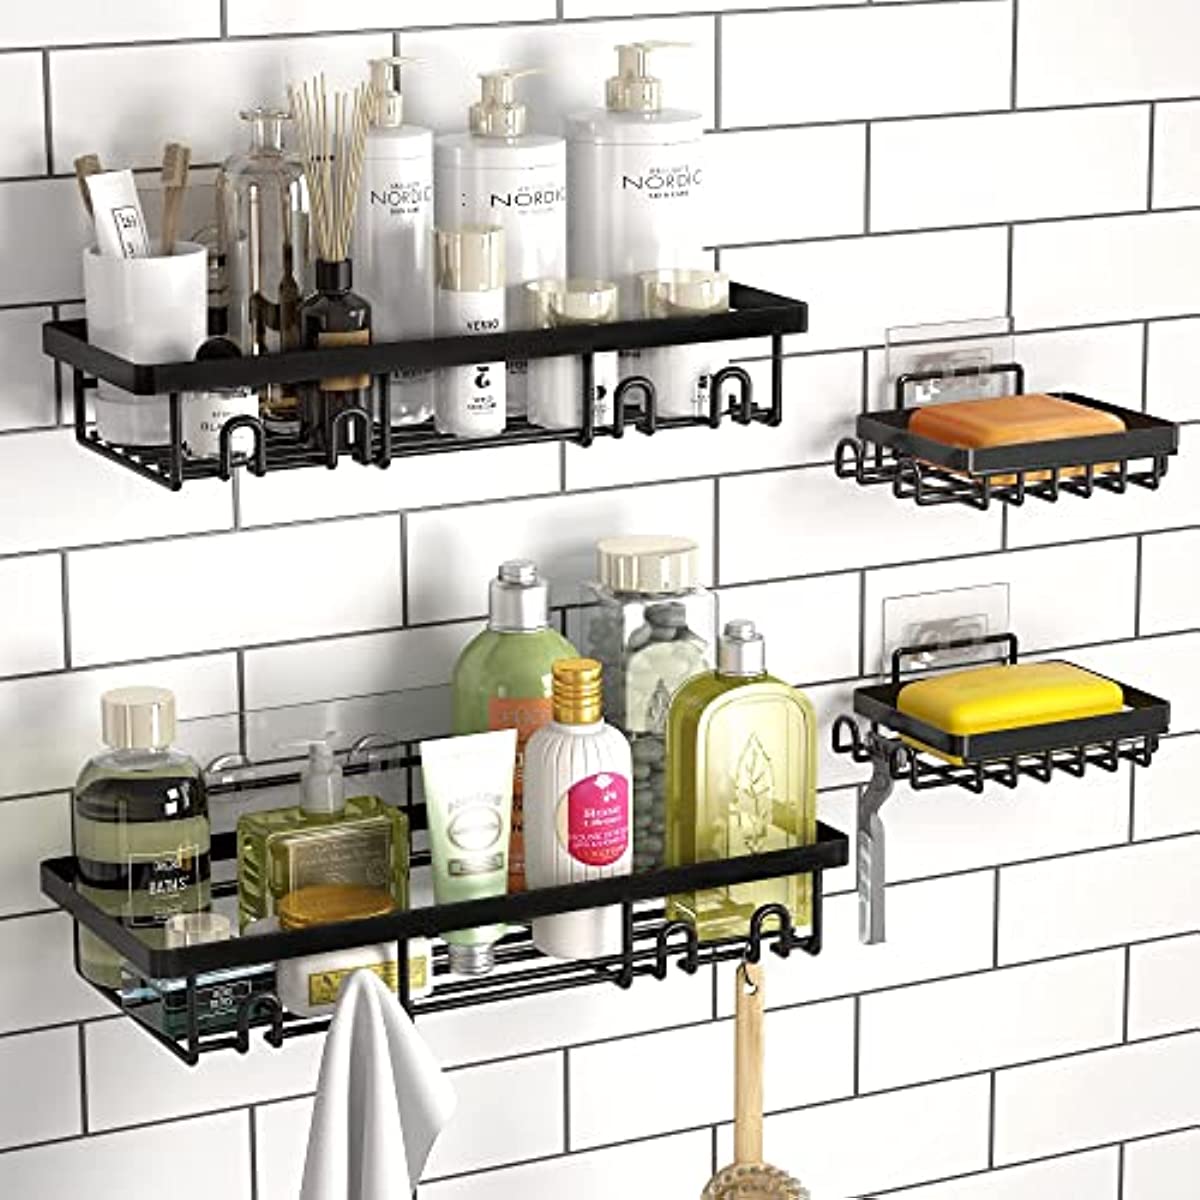 ODesign Adhesive Bathroom Shelf Organizer Shower Caddy Kitchen Spice Rack  Wall Mounted No Drilling SUS304 Stainless